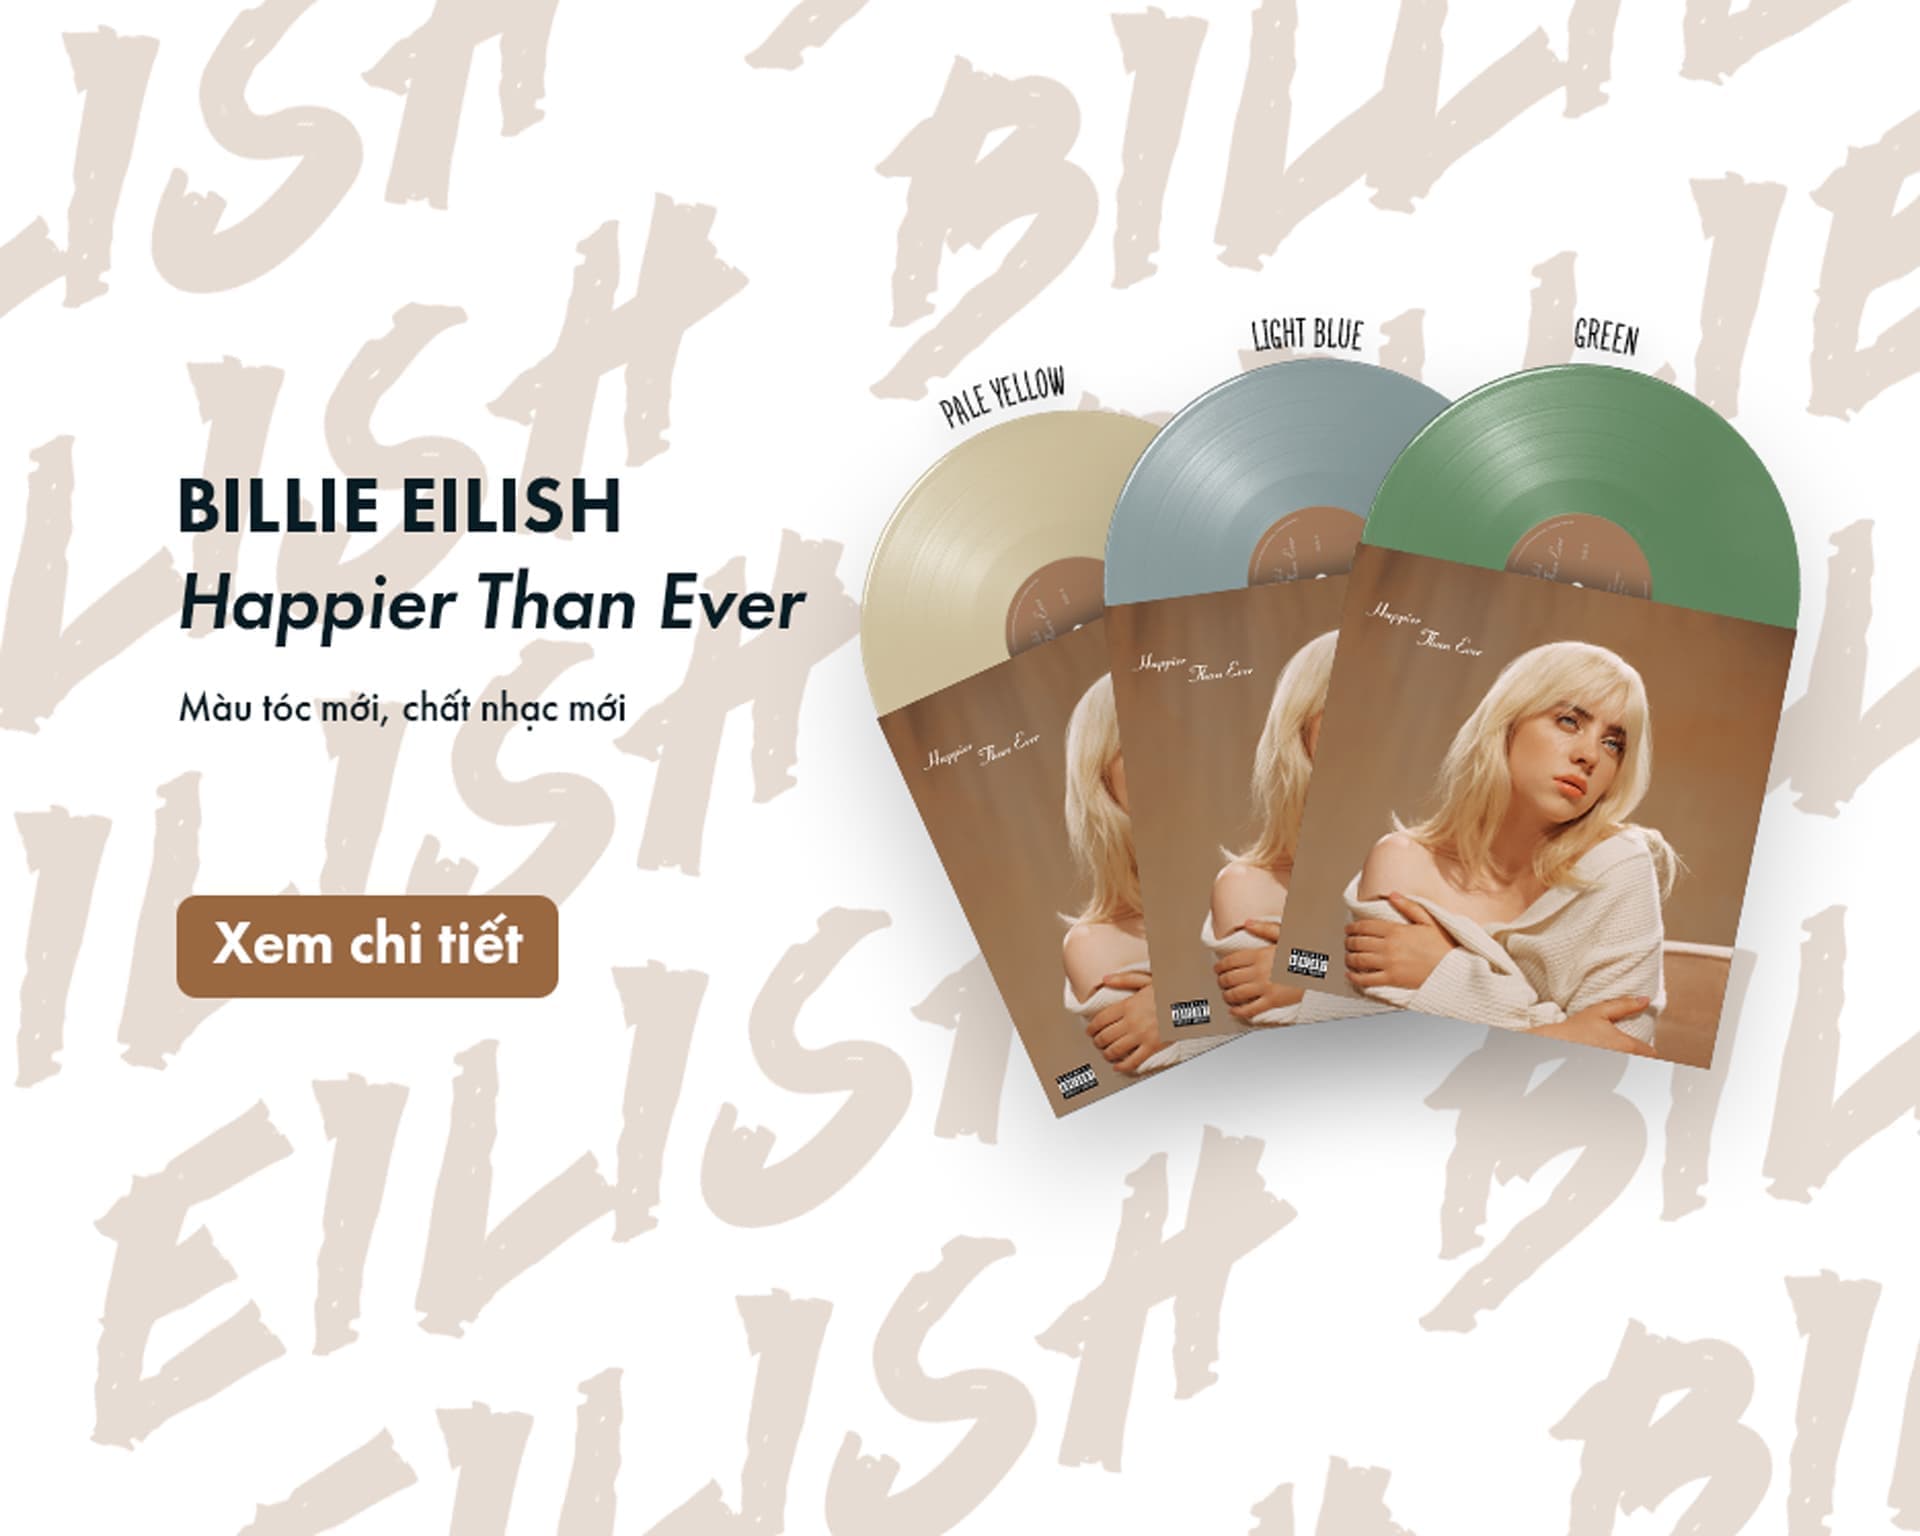 https://vocrecords.vn/product/billie-eilish-happier-than-ever-green/